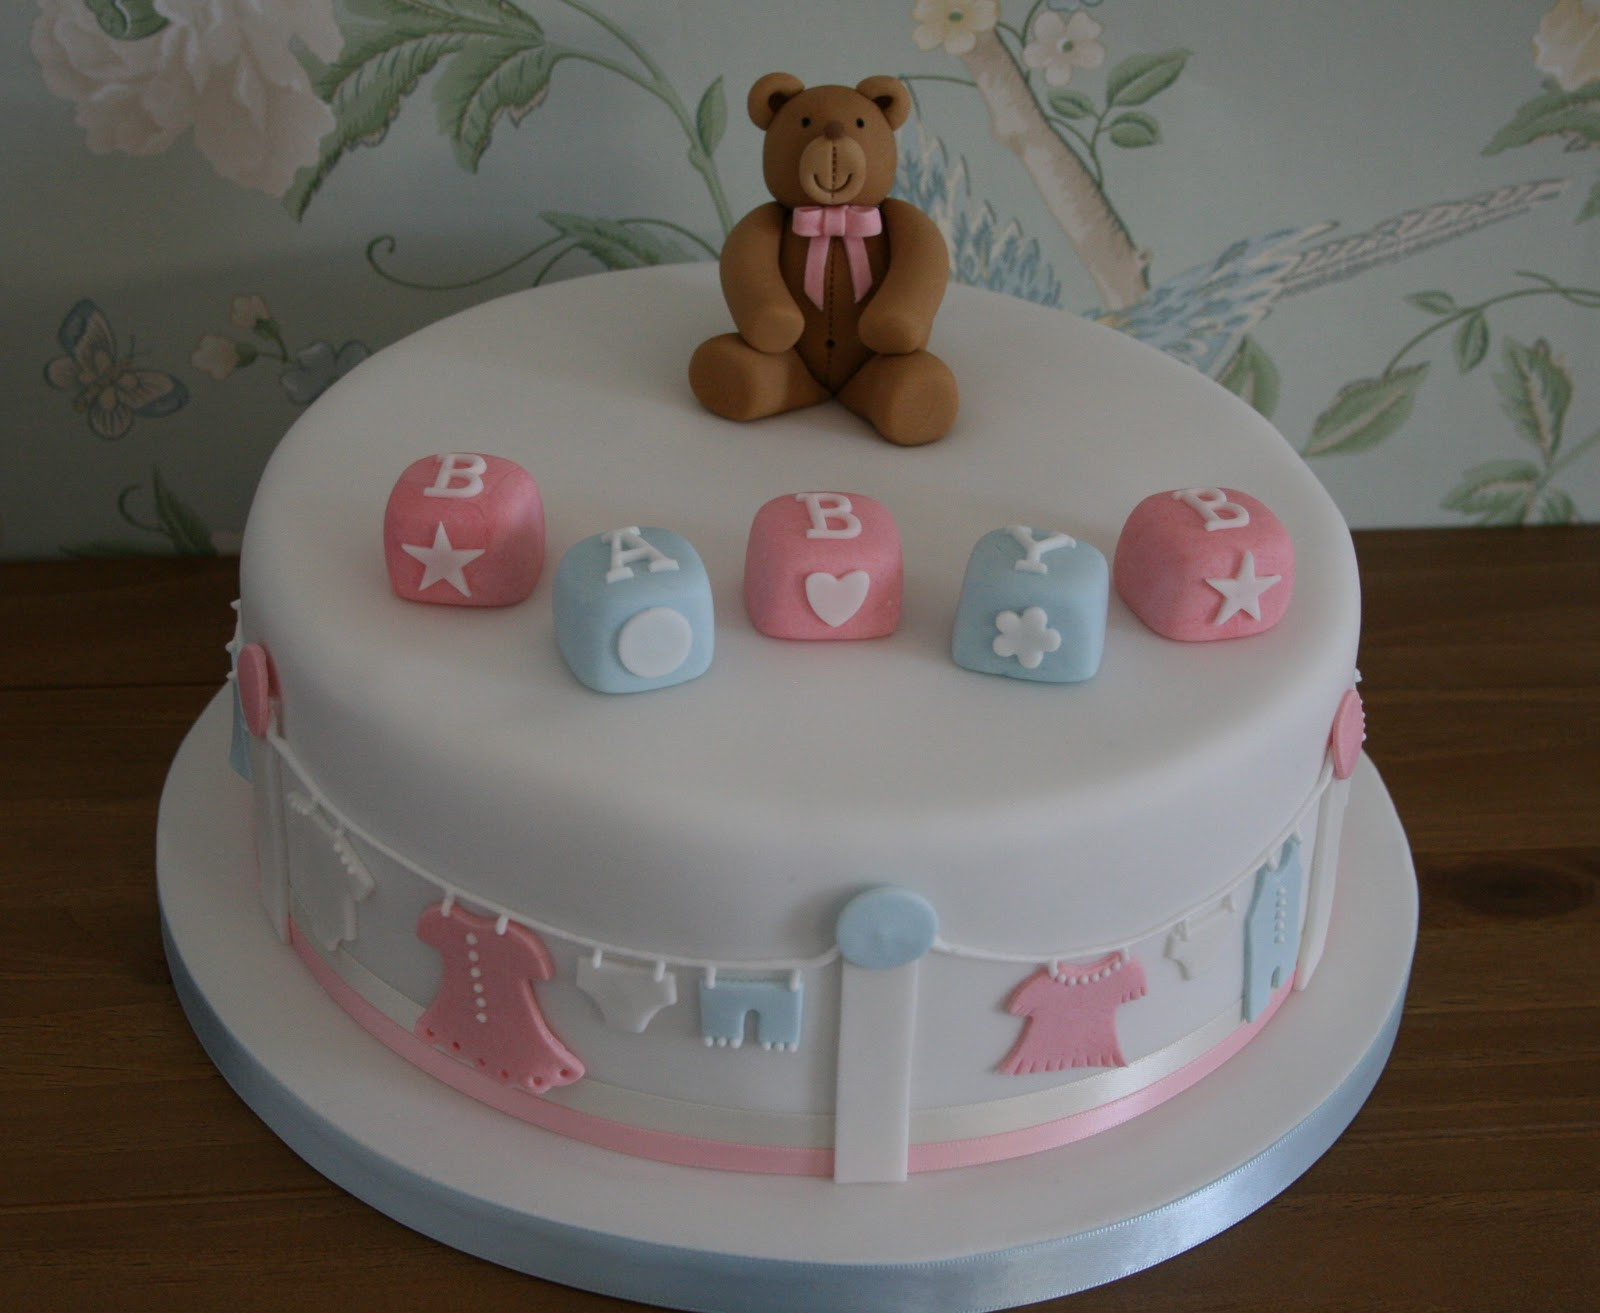 Baby Cake Decoration Ideas
 70 Baby Shower Cakes and Cupcakes Ideas